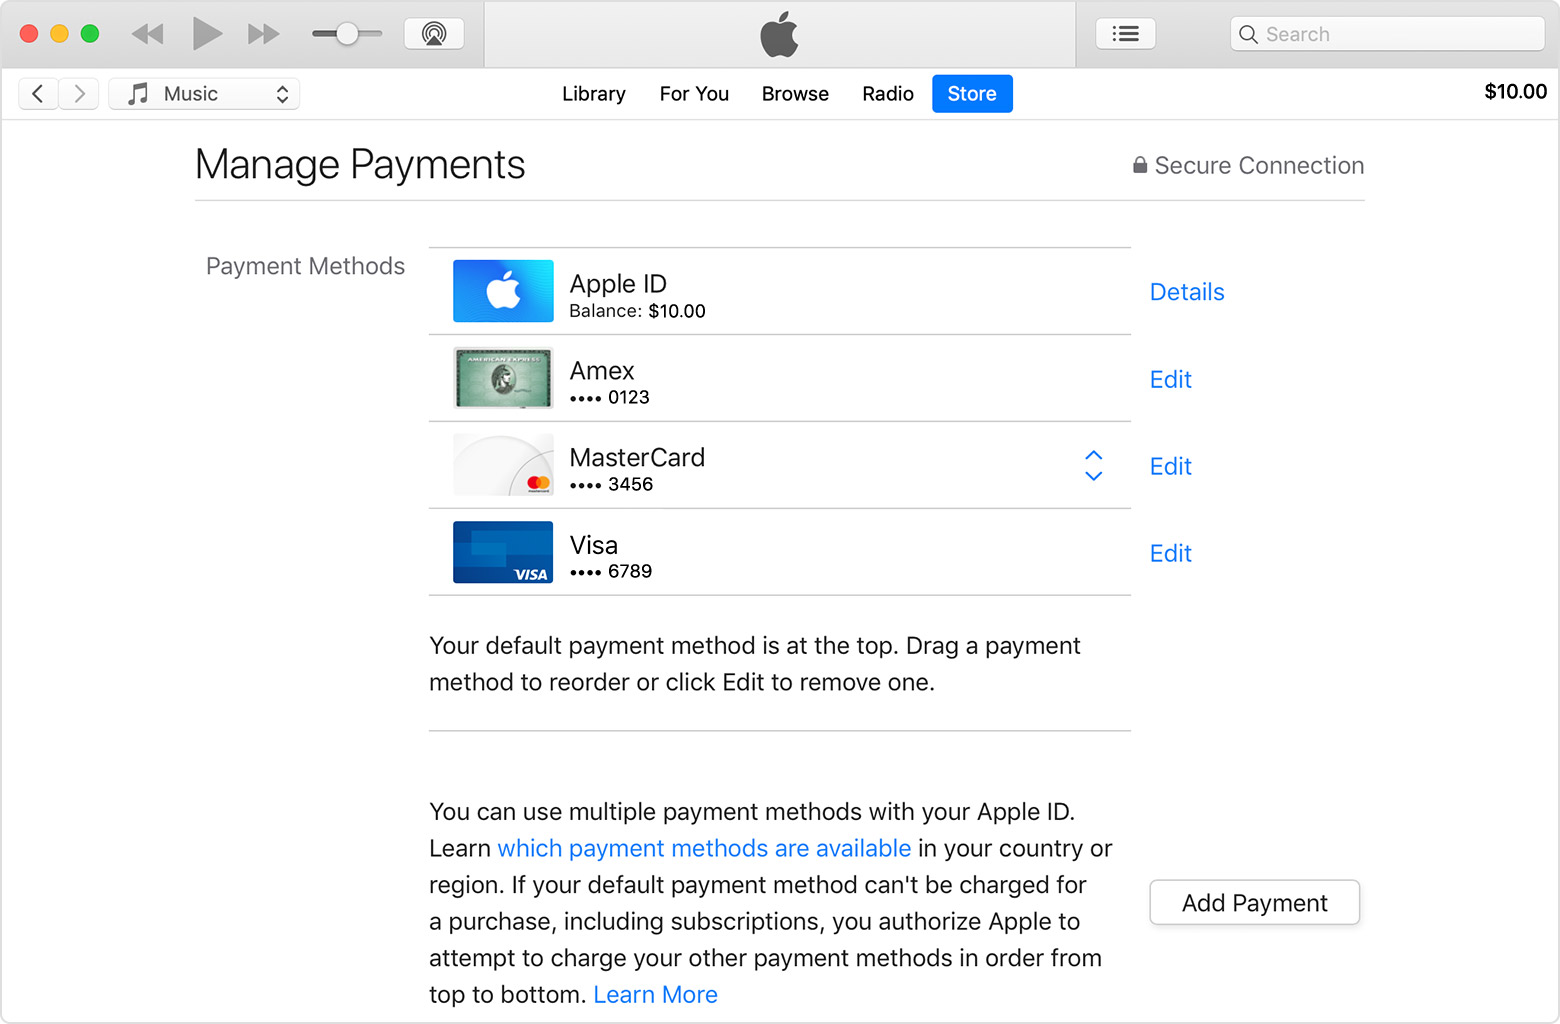 Manage Payments page in iTunes showing Apple ID balance and some credit cards.